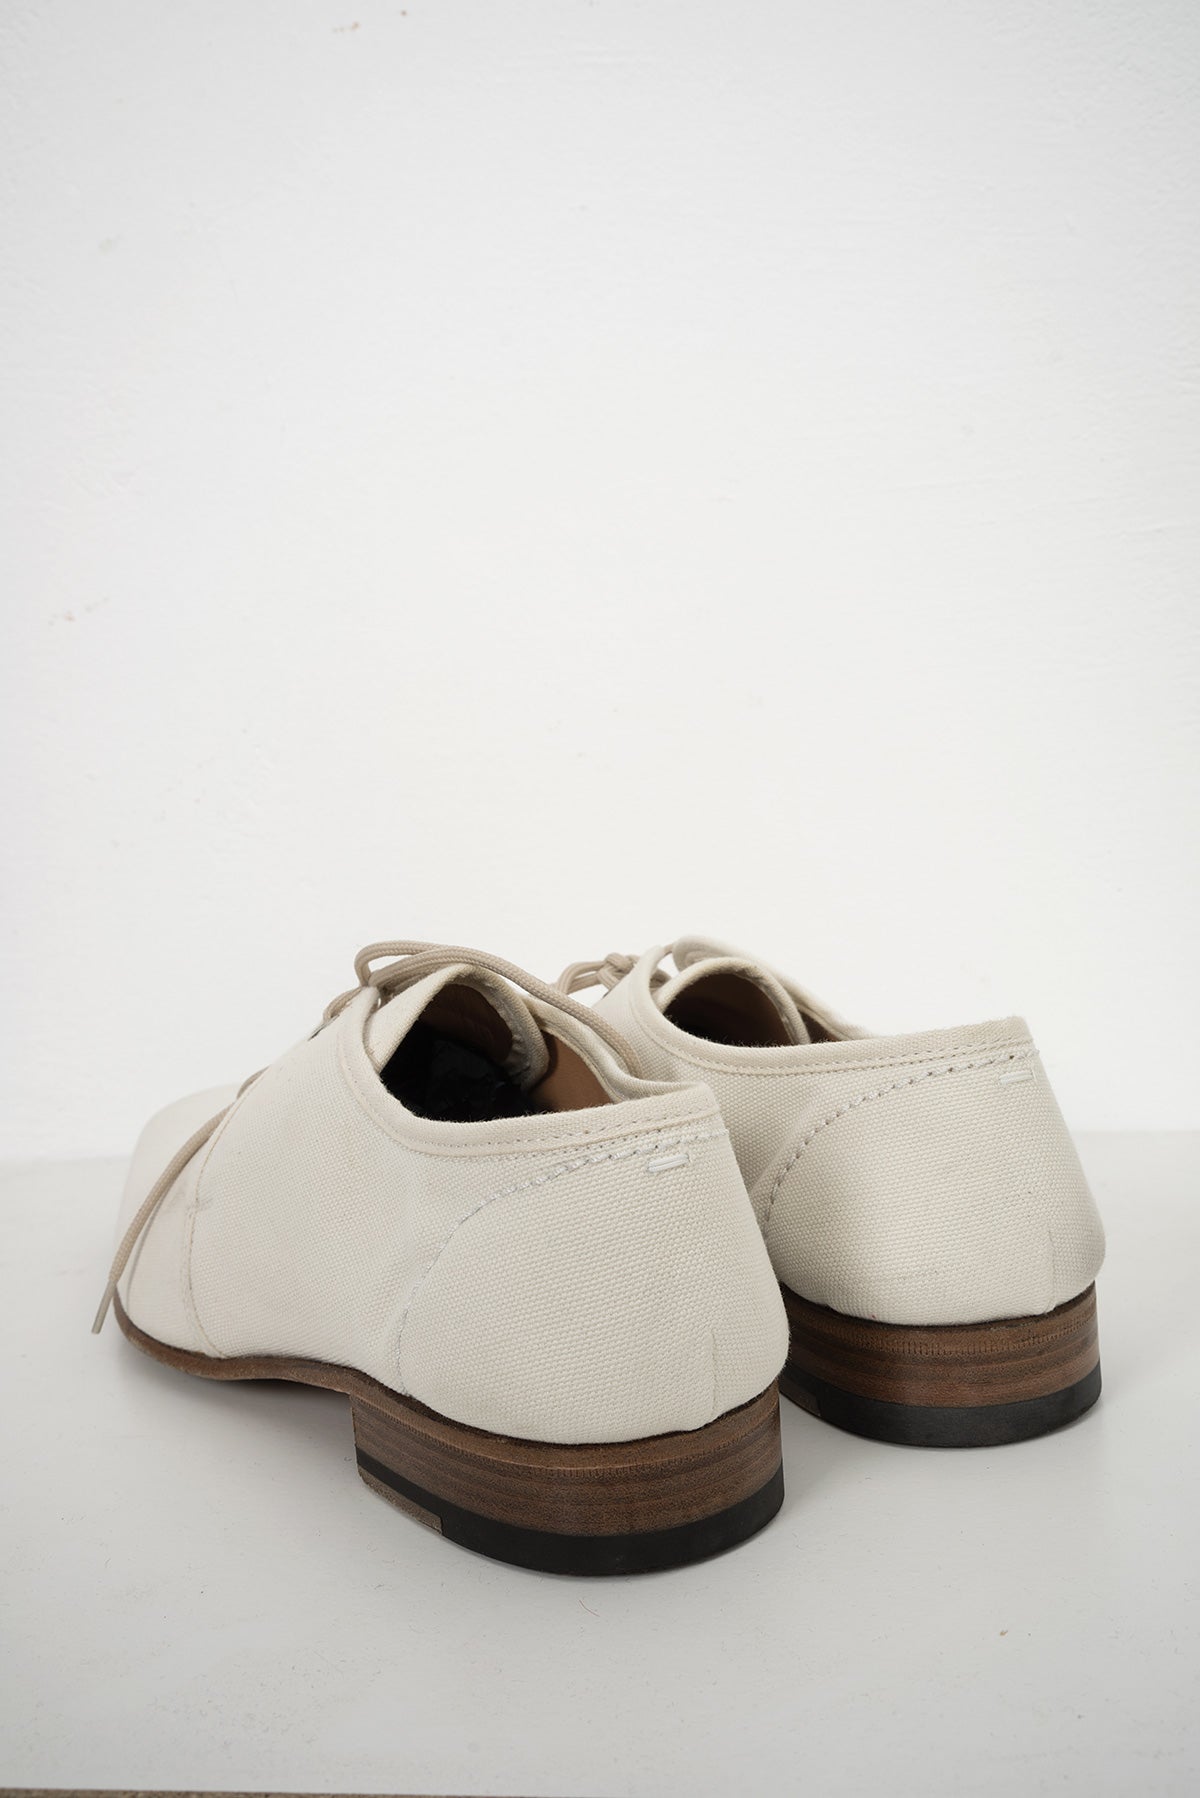 2007 S/S BROGUE SHOES IN OFF-WHITE CANVAS